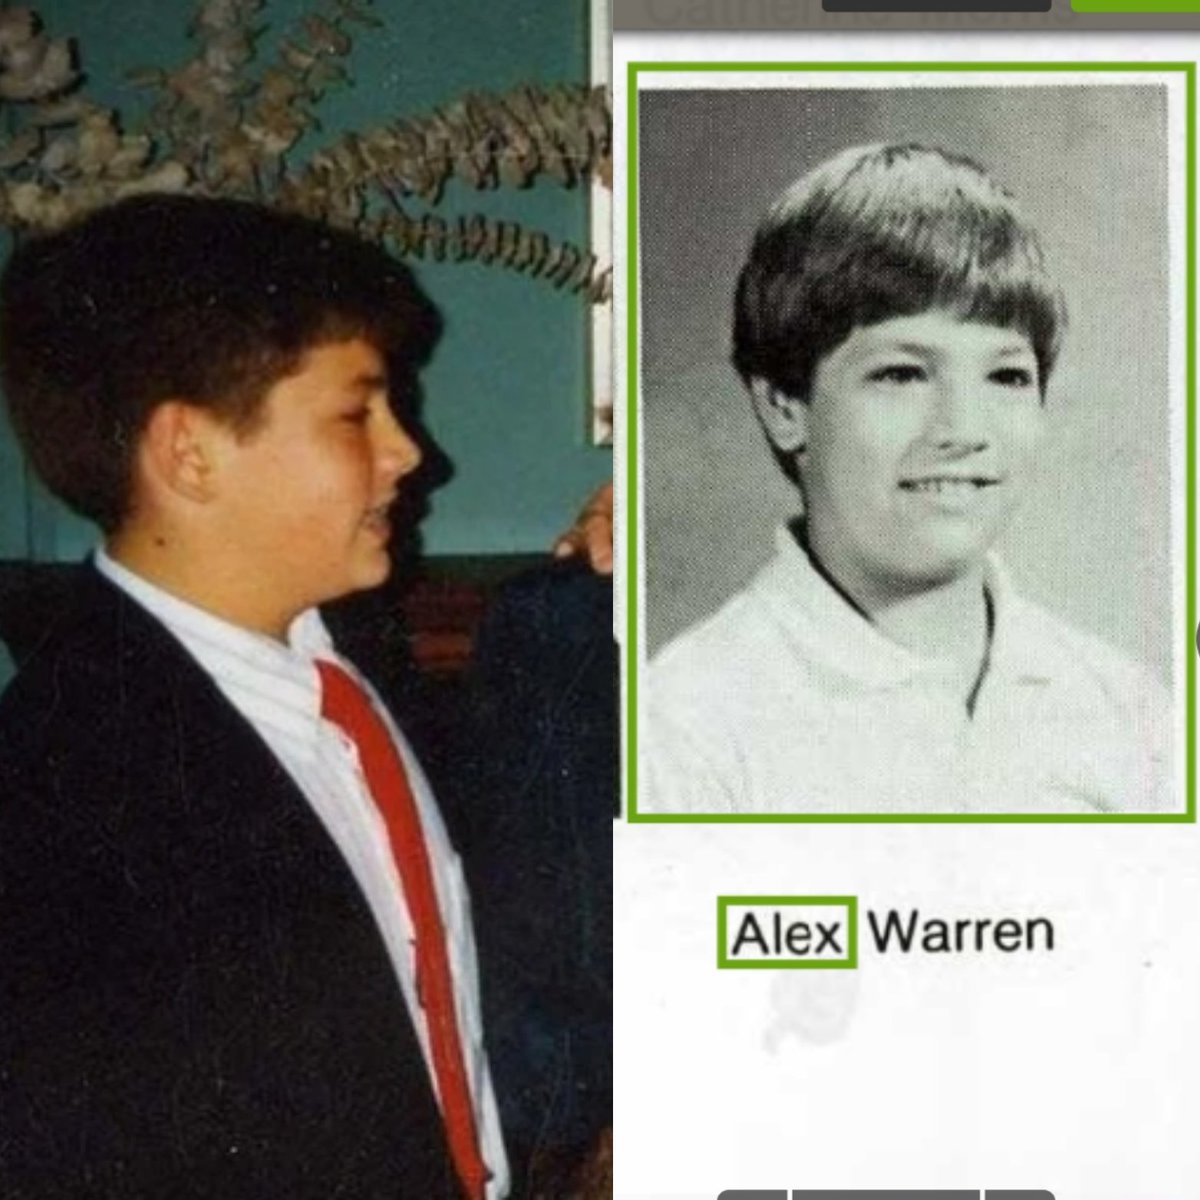 Here's the ONLY family photo I could find of Alex on the internet (left). The other photo was from the school yearbook (right). He is now 43.